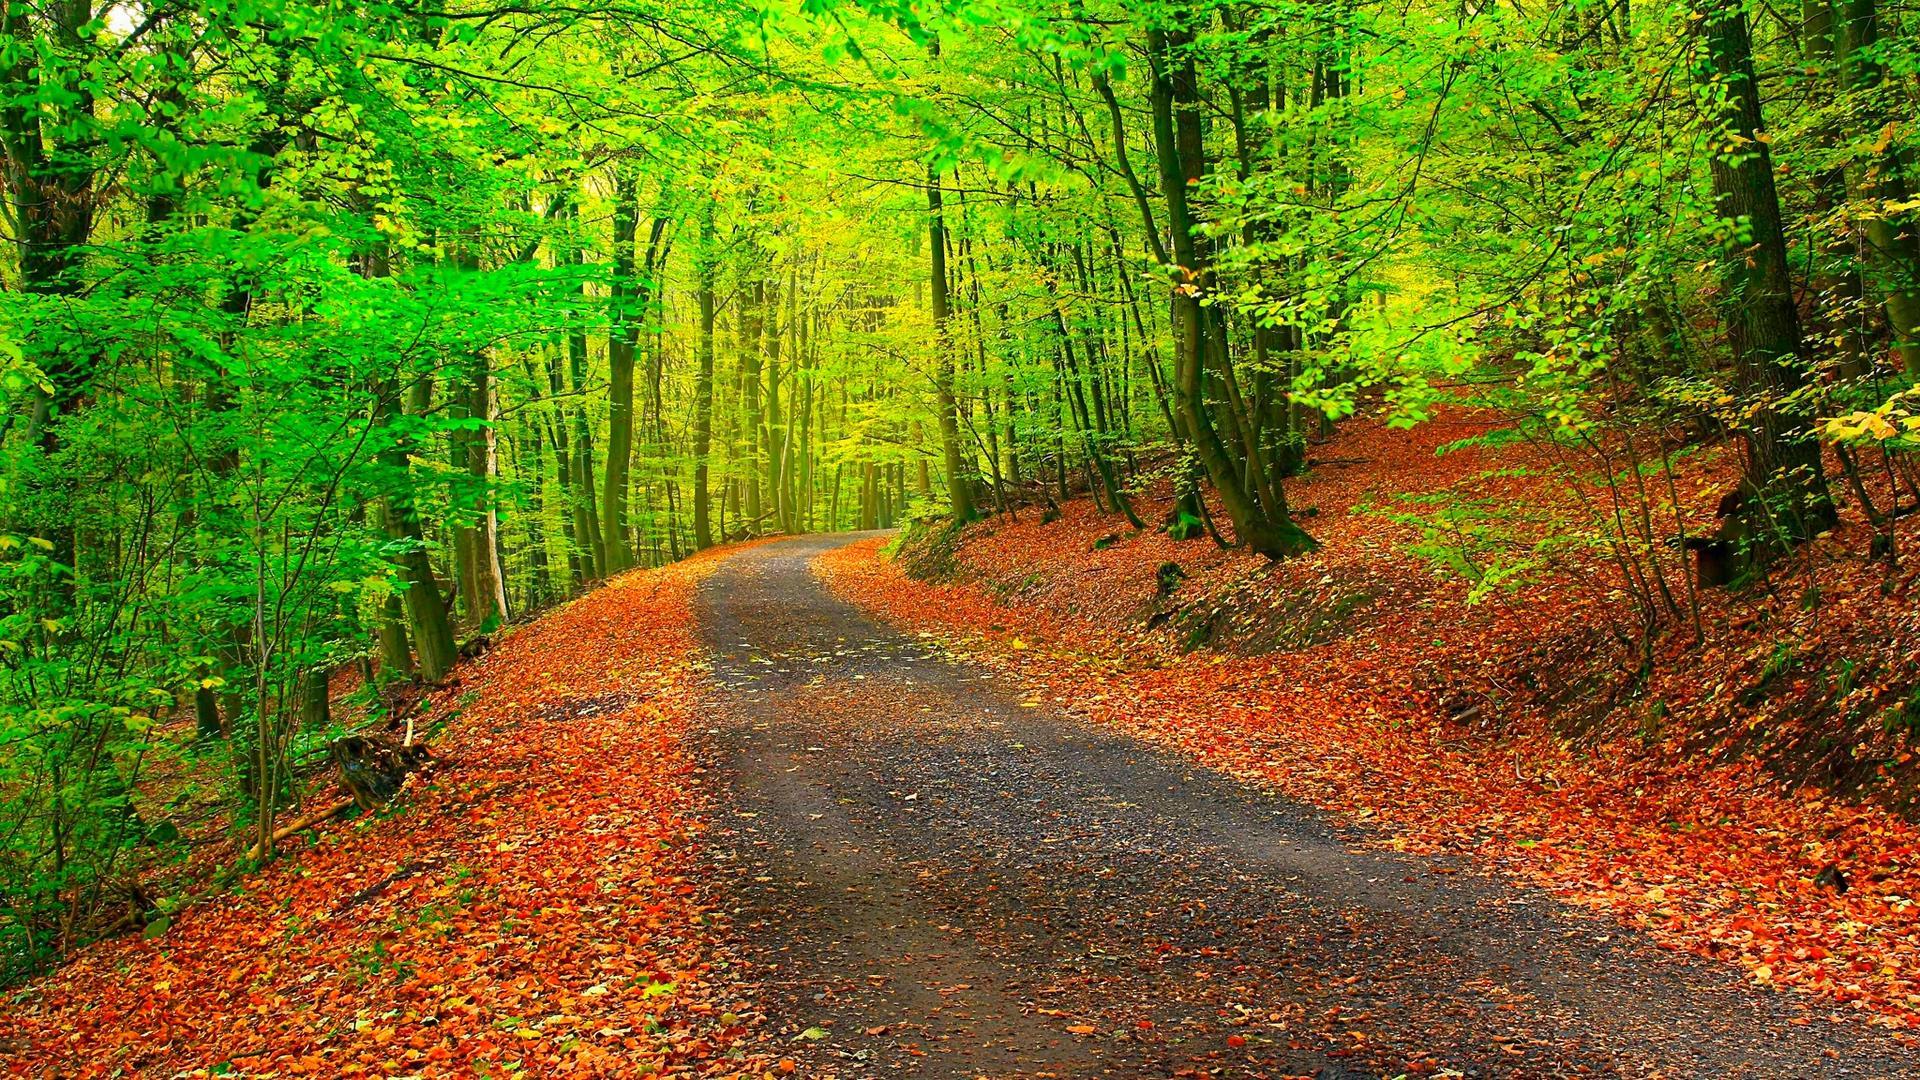 Forest Path Autumn Trees and Fallen Leaves Wallpaper